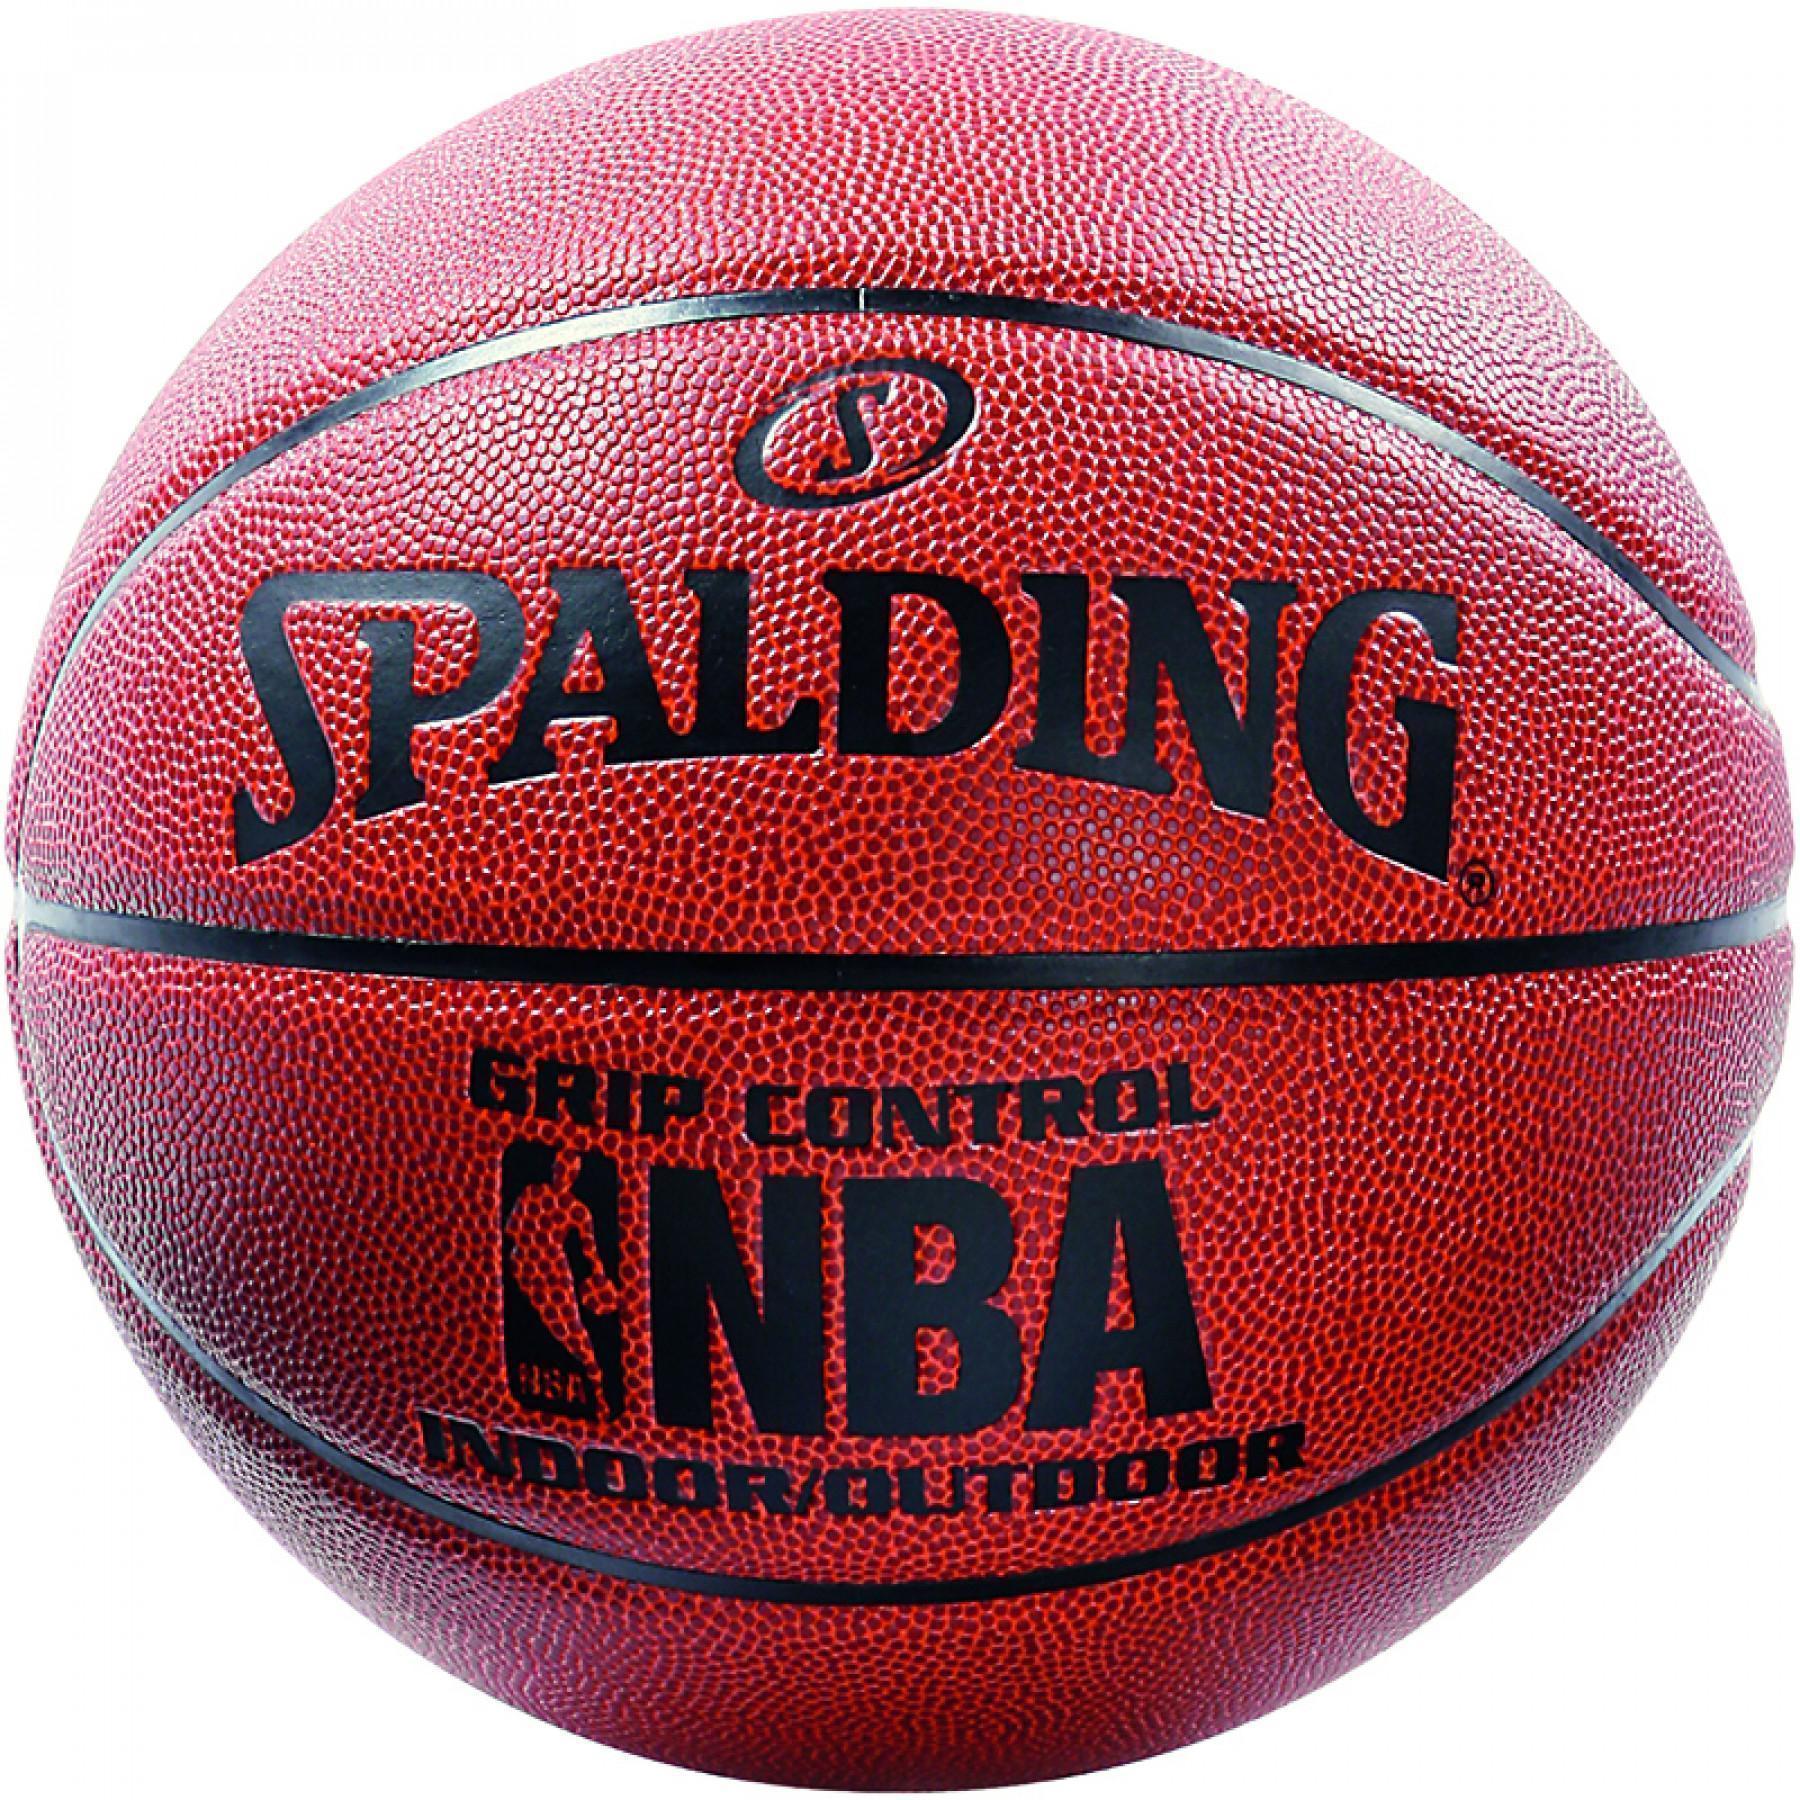 Palloncino Spalding NBA Grip Control in/out orange